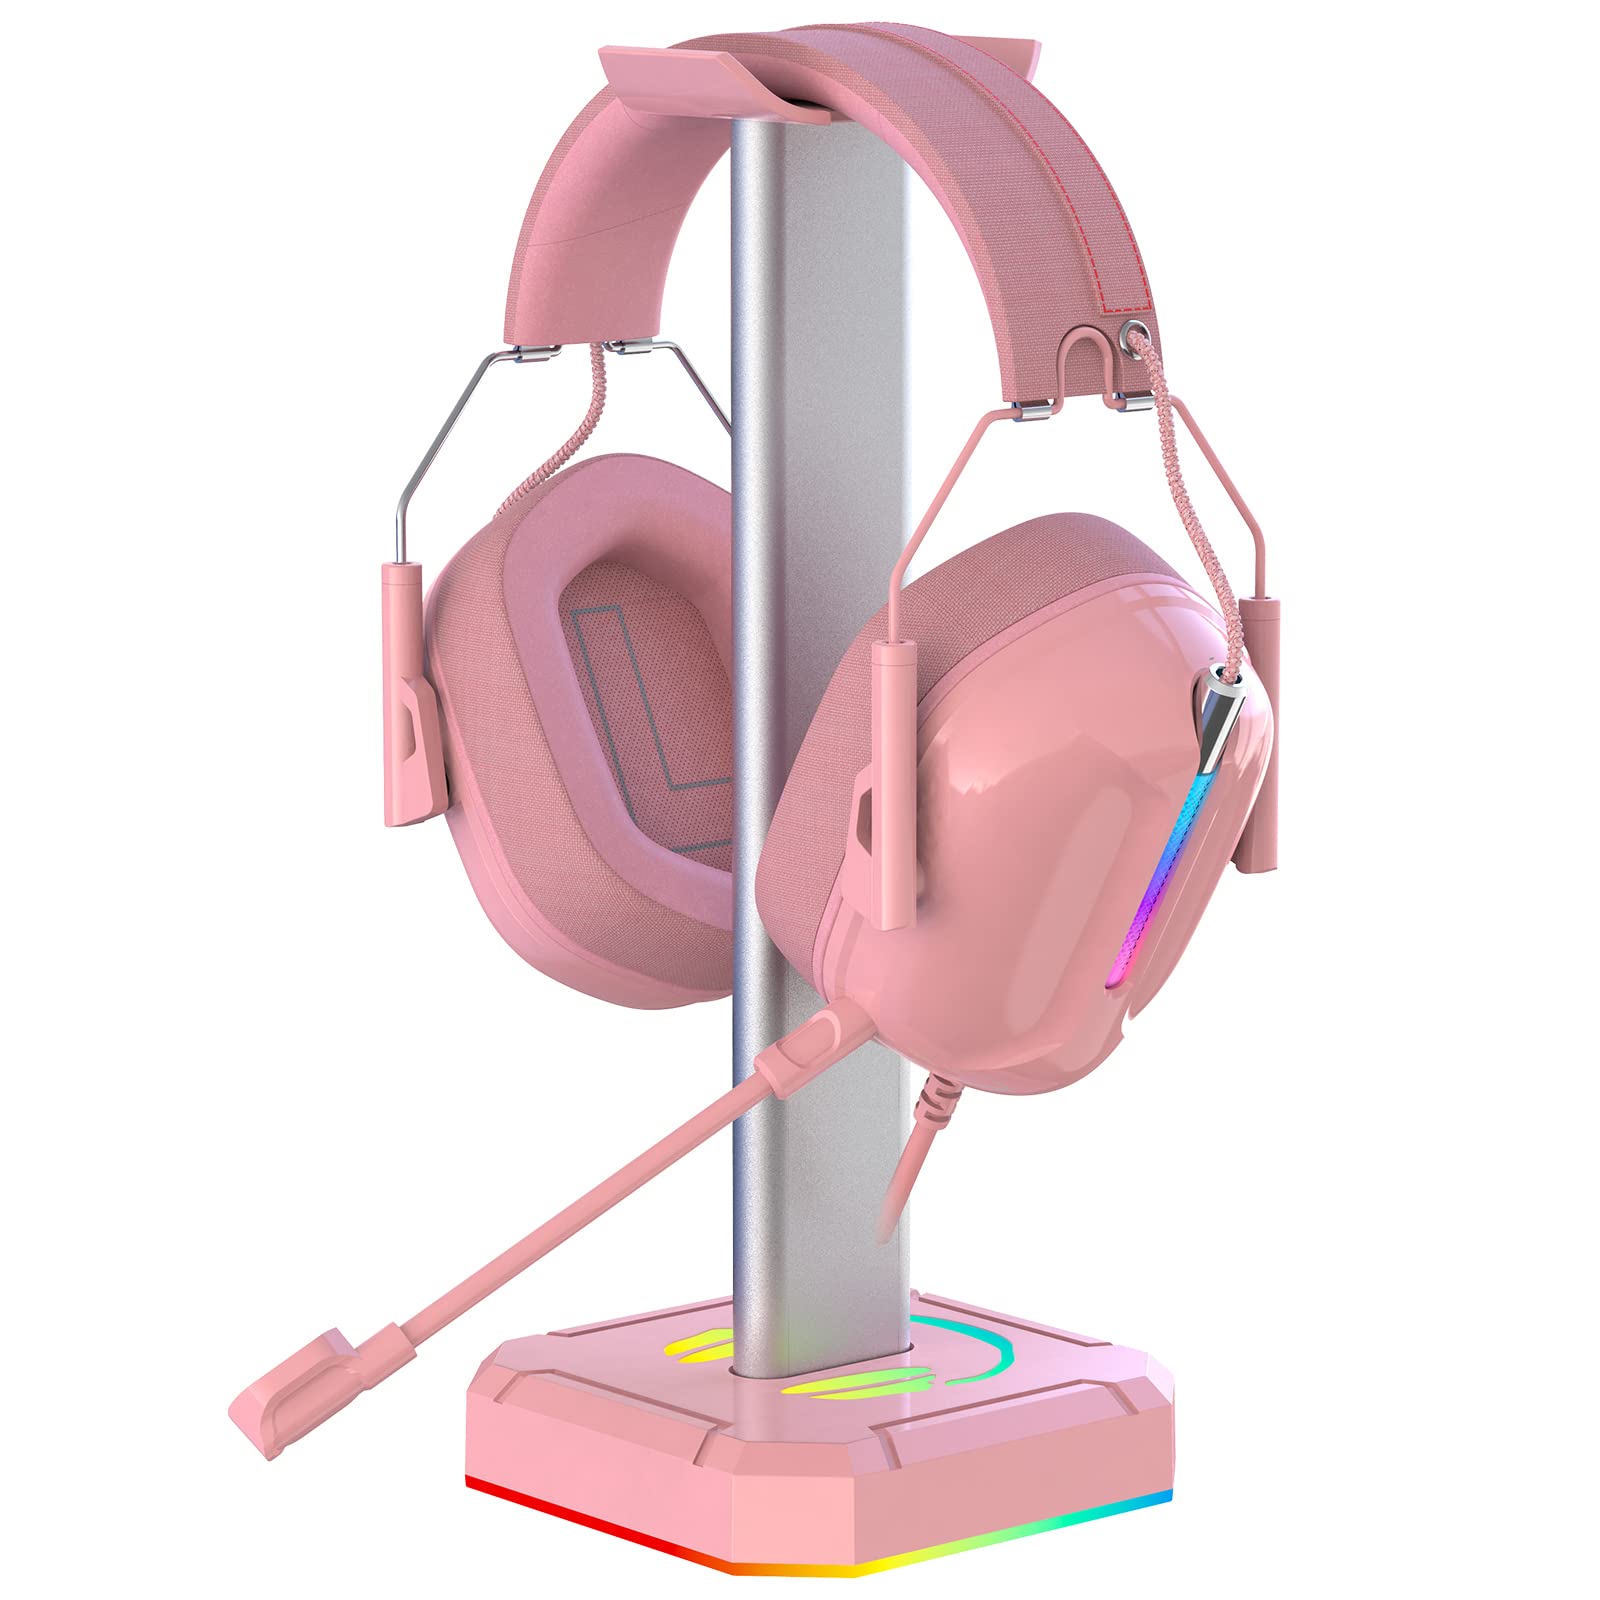 Tupargo Pink Headphone Stand Gaming Headset Holder With Rolling Caption Rgb Light For Kraken Headset,Aluminum Alloy Connecting R